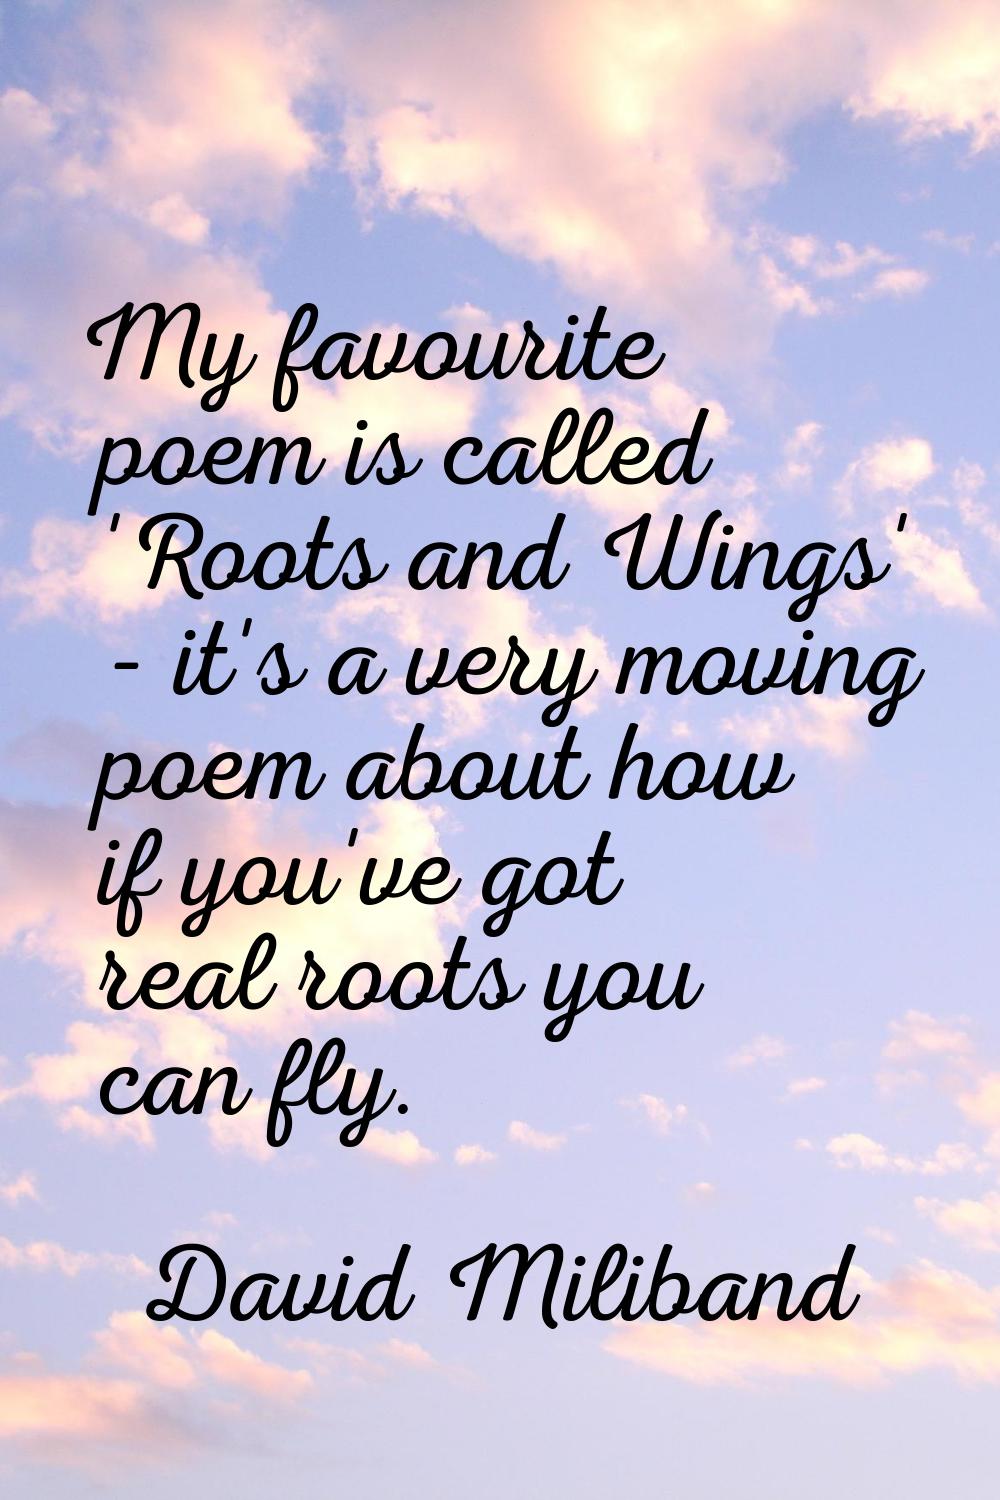 My favourite poem is called 'Roots and Wings' - it's a very moving poem about how if you've got rea